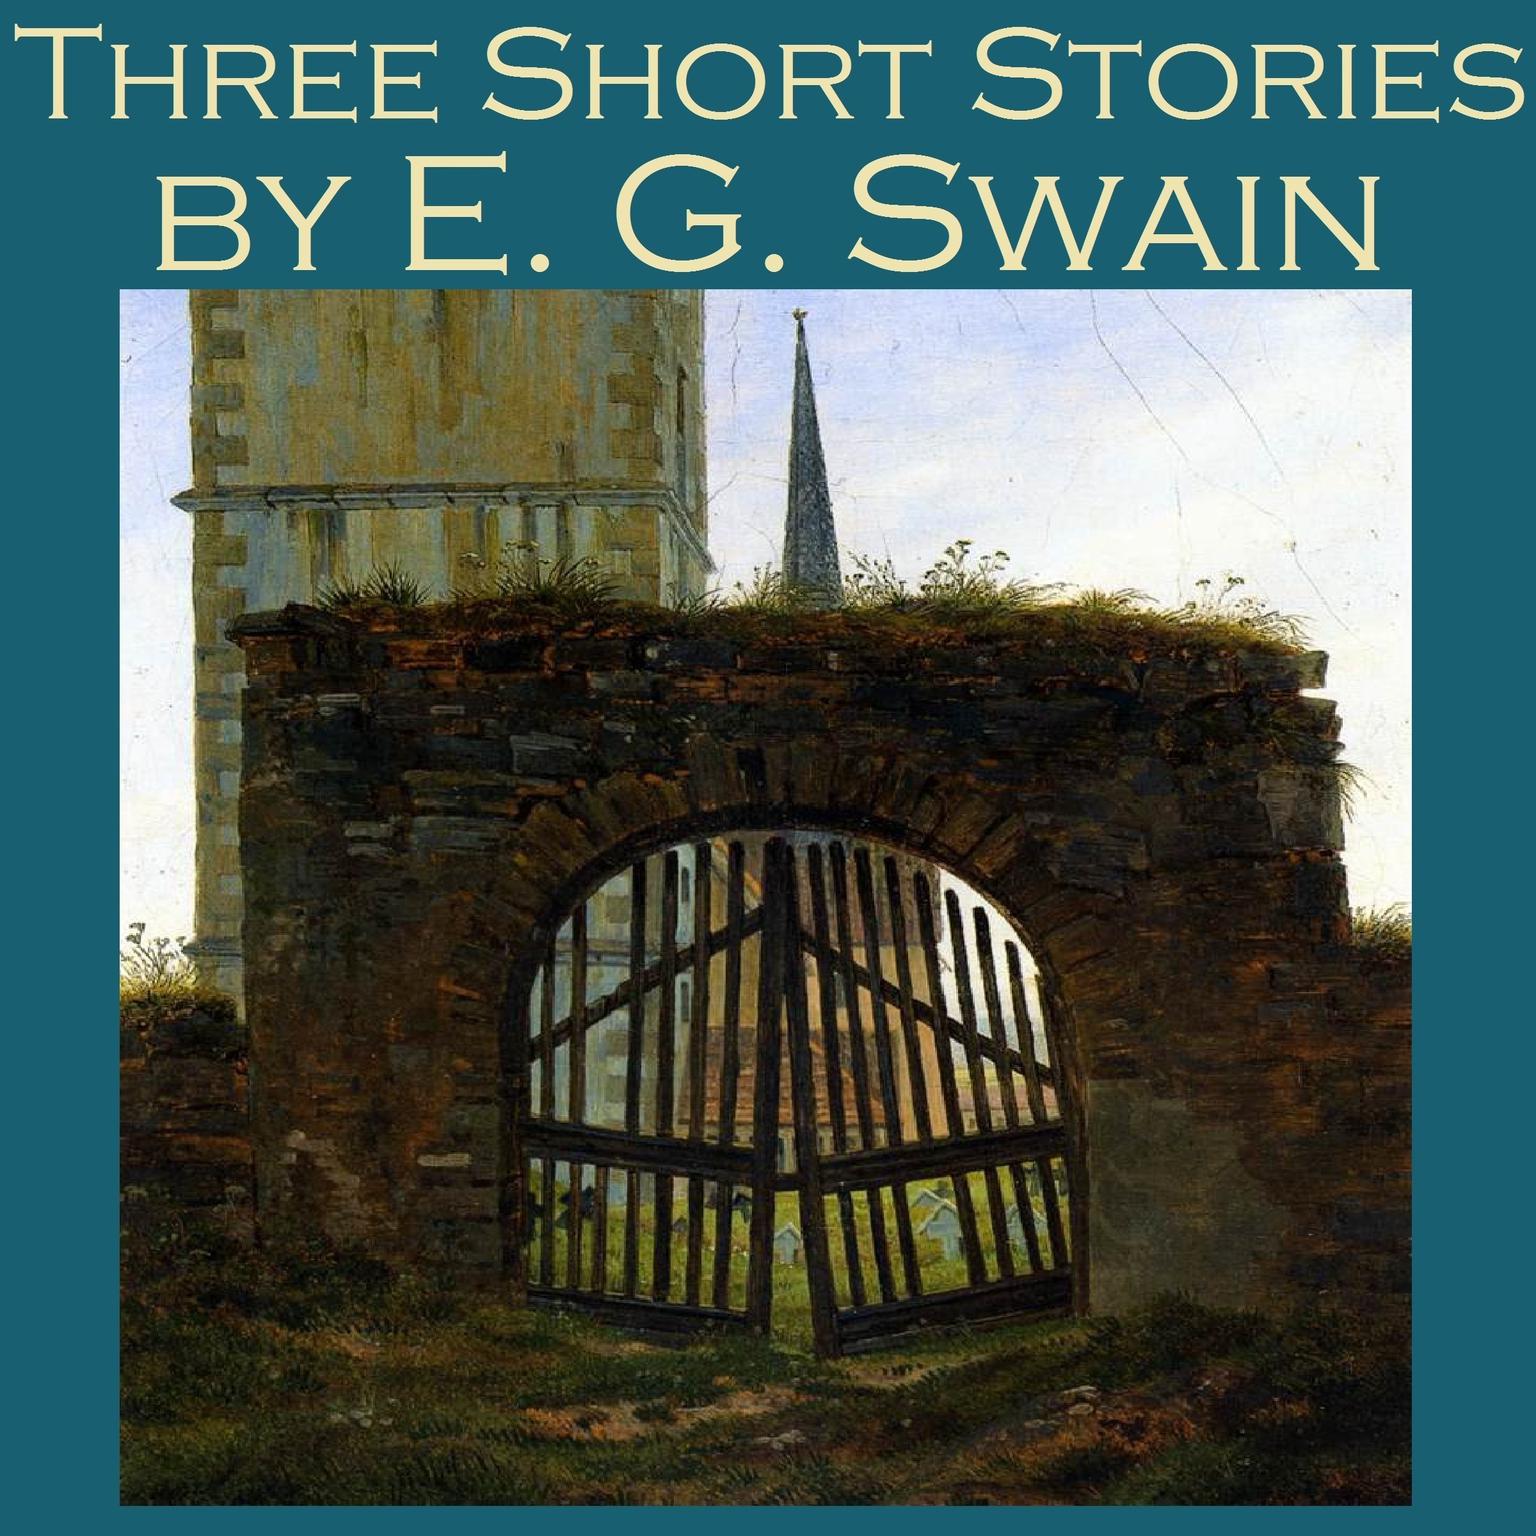 Three Short Stories by E. G. Swain Audiobook, by E. G. Swain